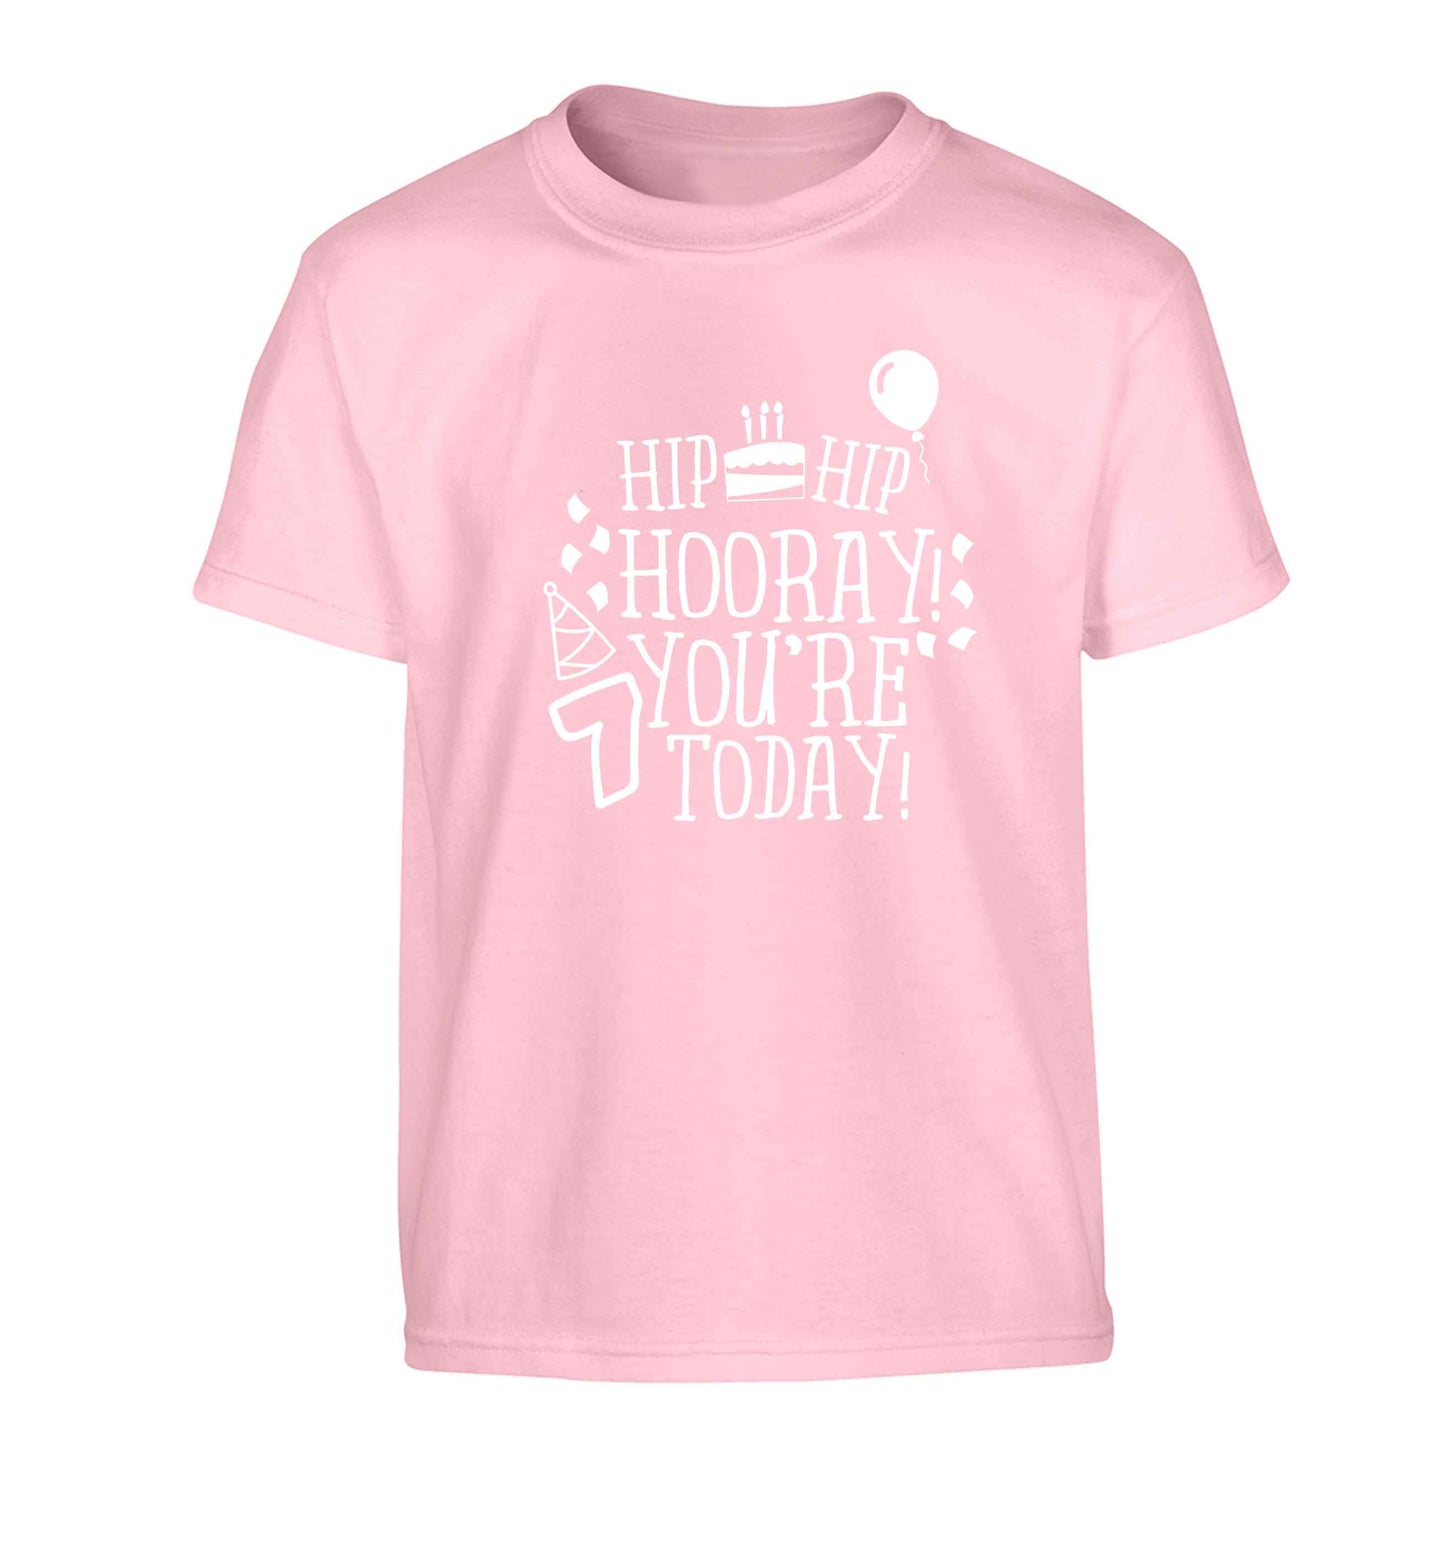 Hip hip hooray you're seven today! Children's light pink Tshirt 12-13 Years